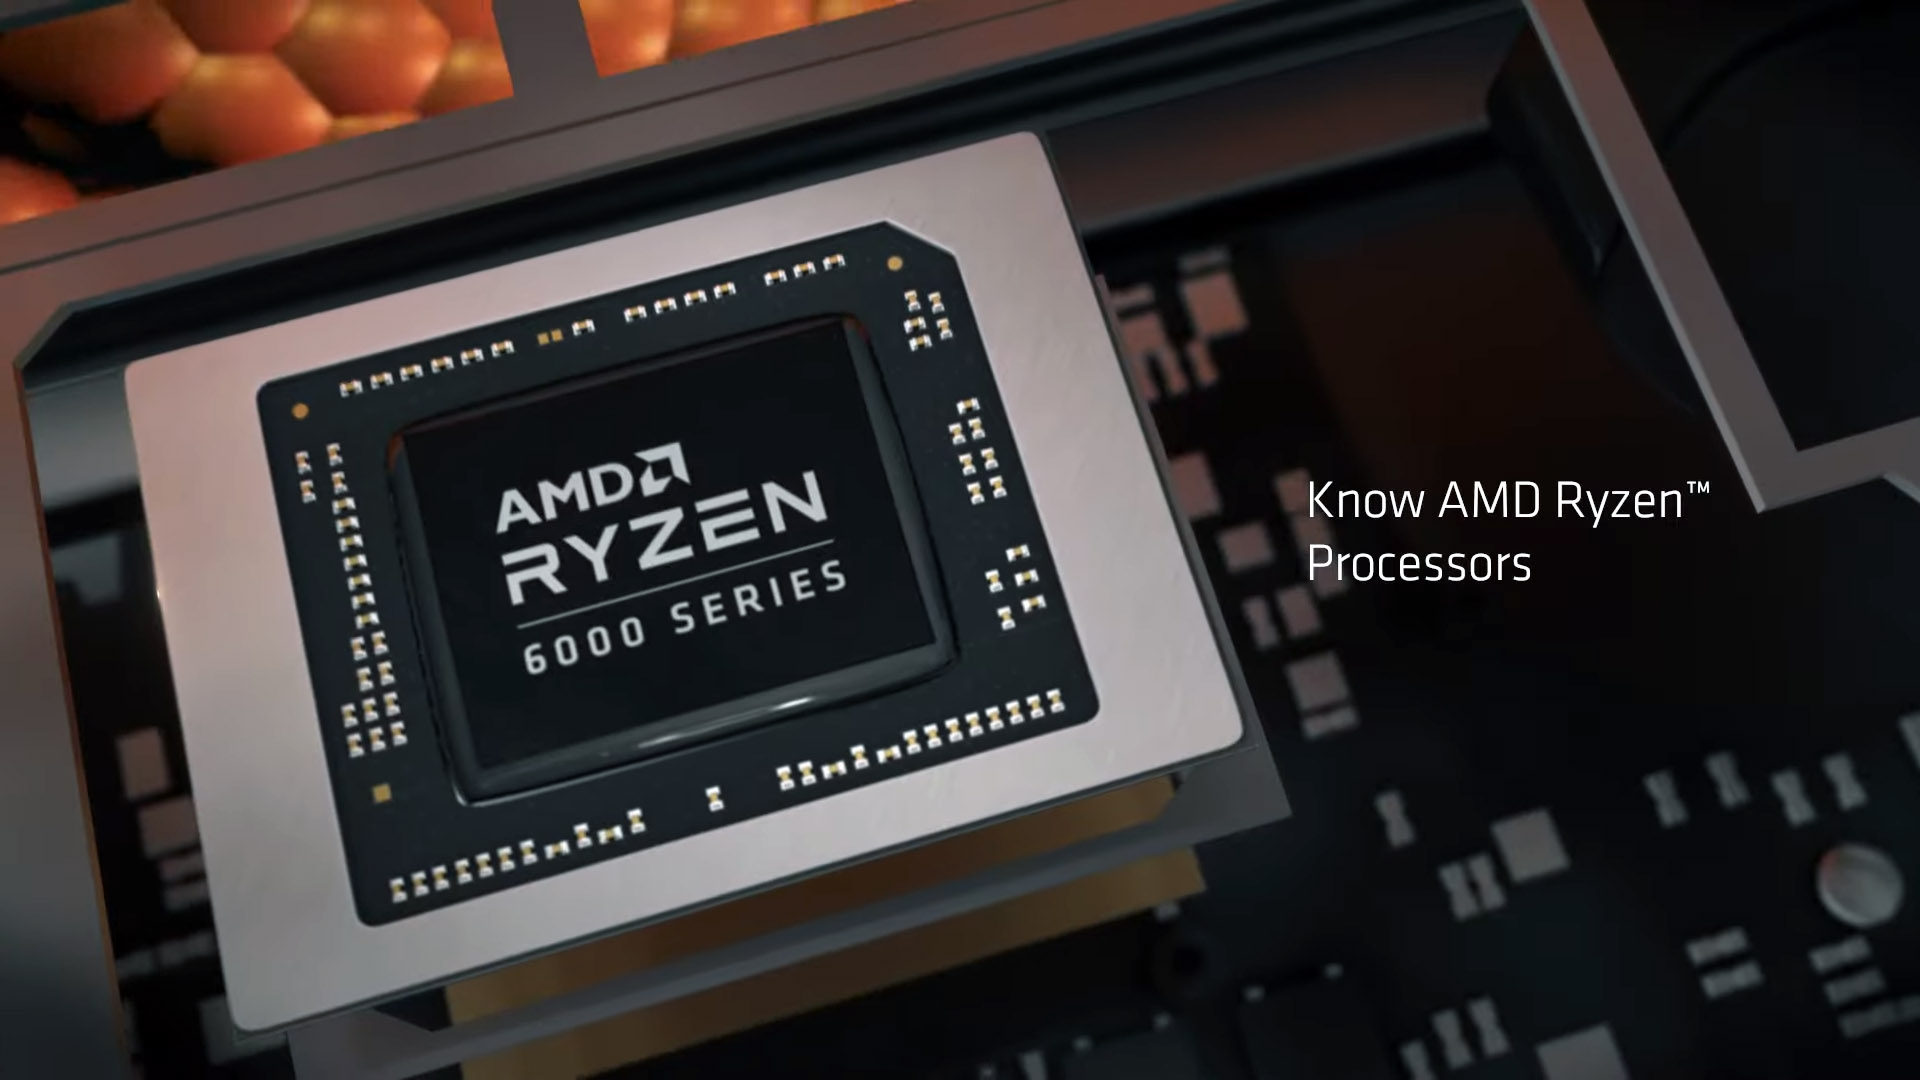 How much will the AMD Ryzen 6000 series cost? 